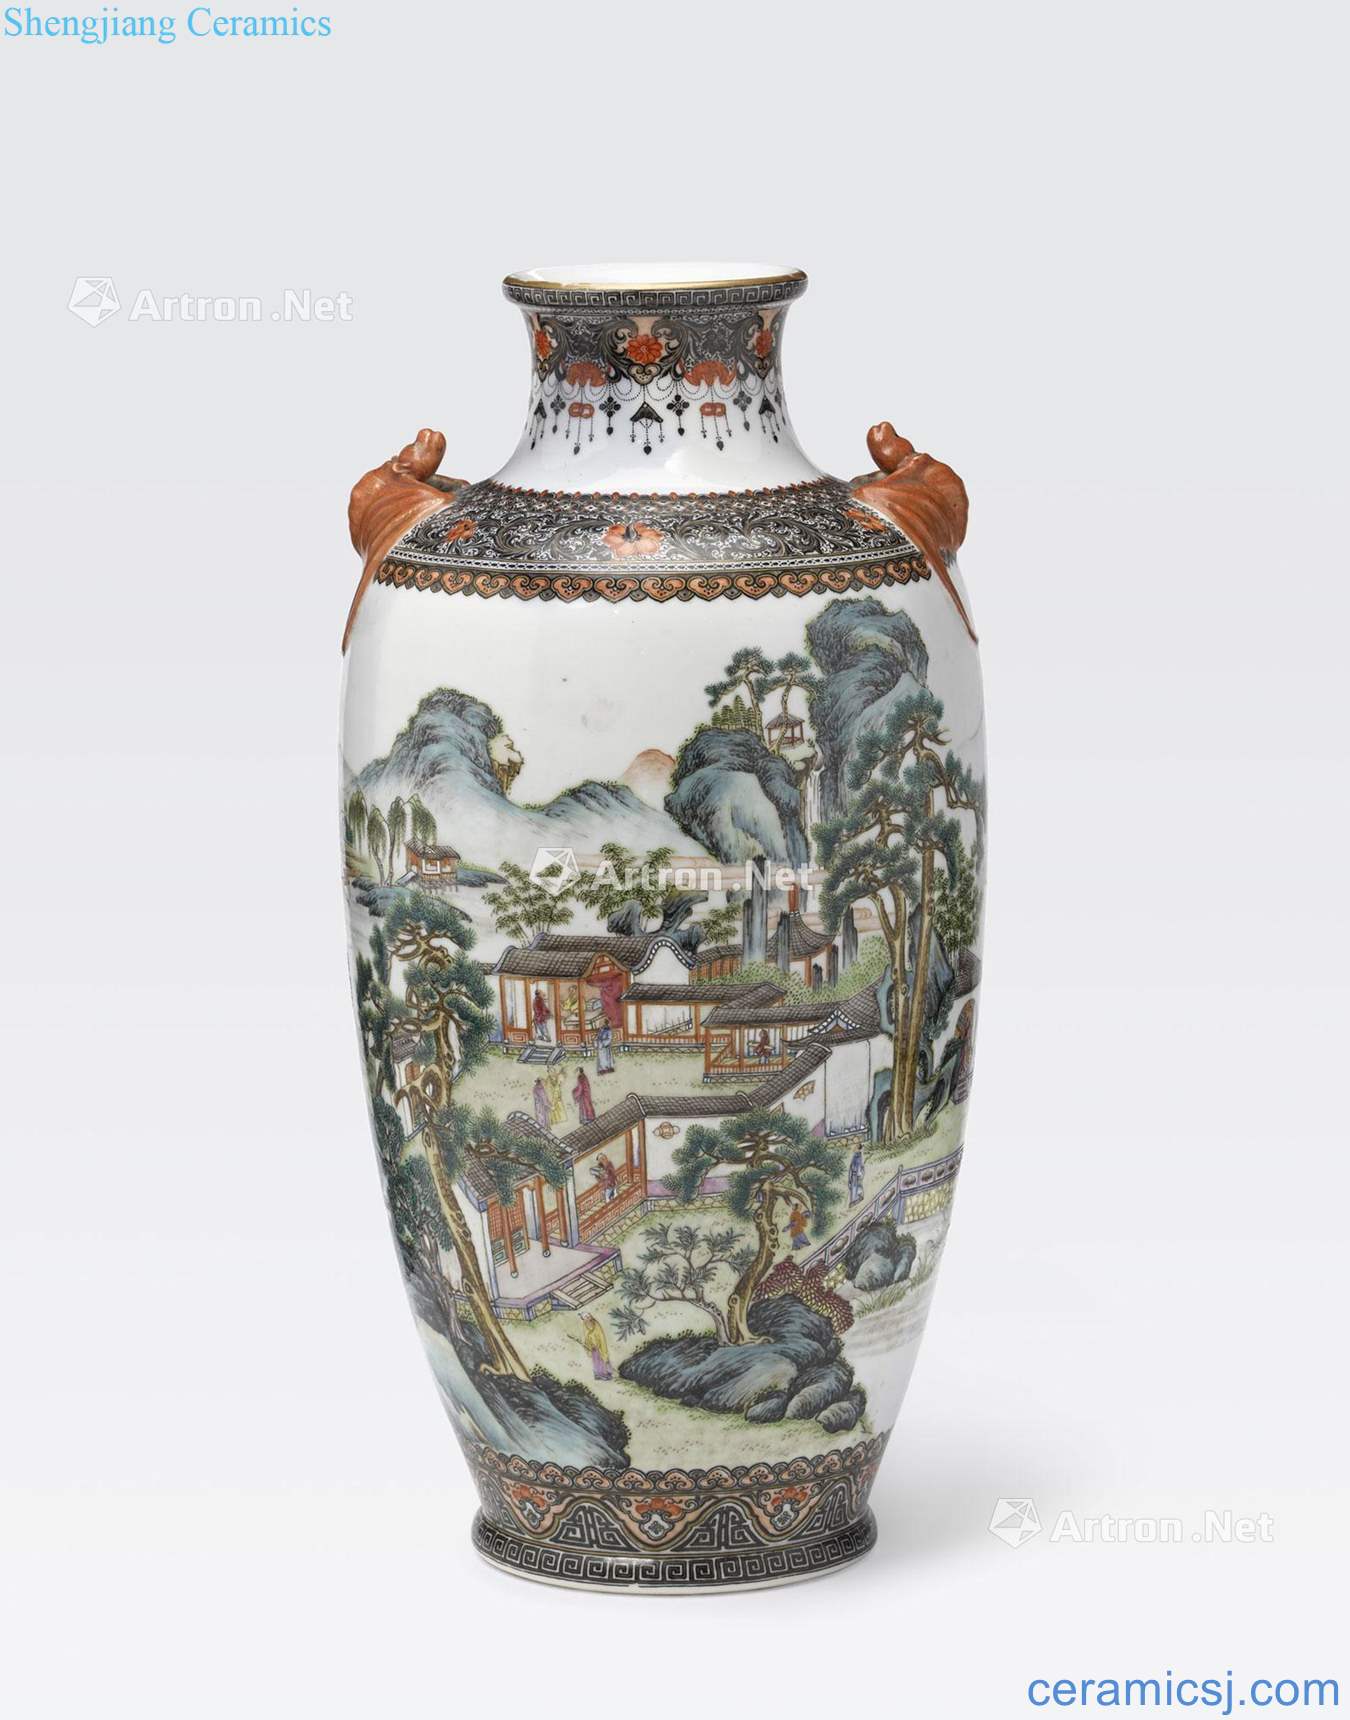 Qianlong mark, the Republic period A FAMILLE ROSE ENAMELED VASE WITH BAT HANDLES